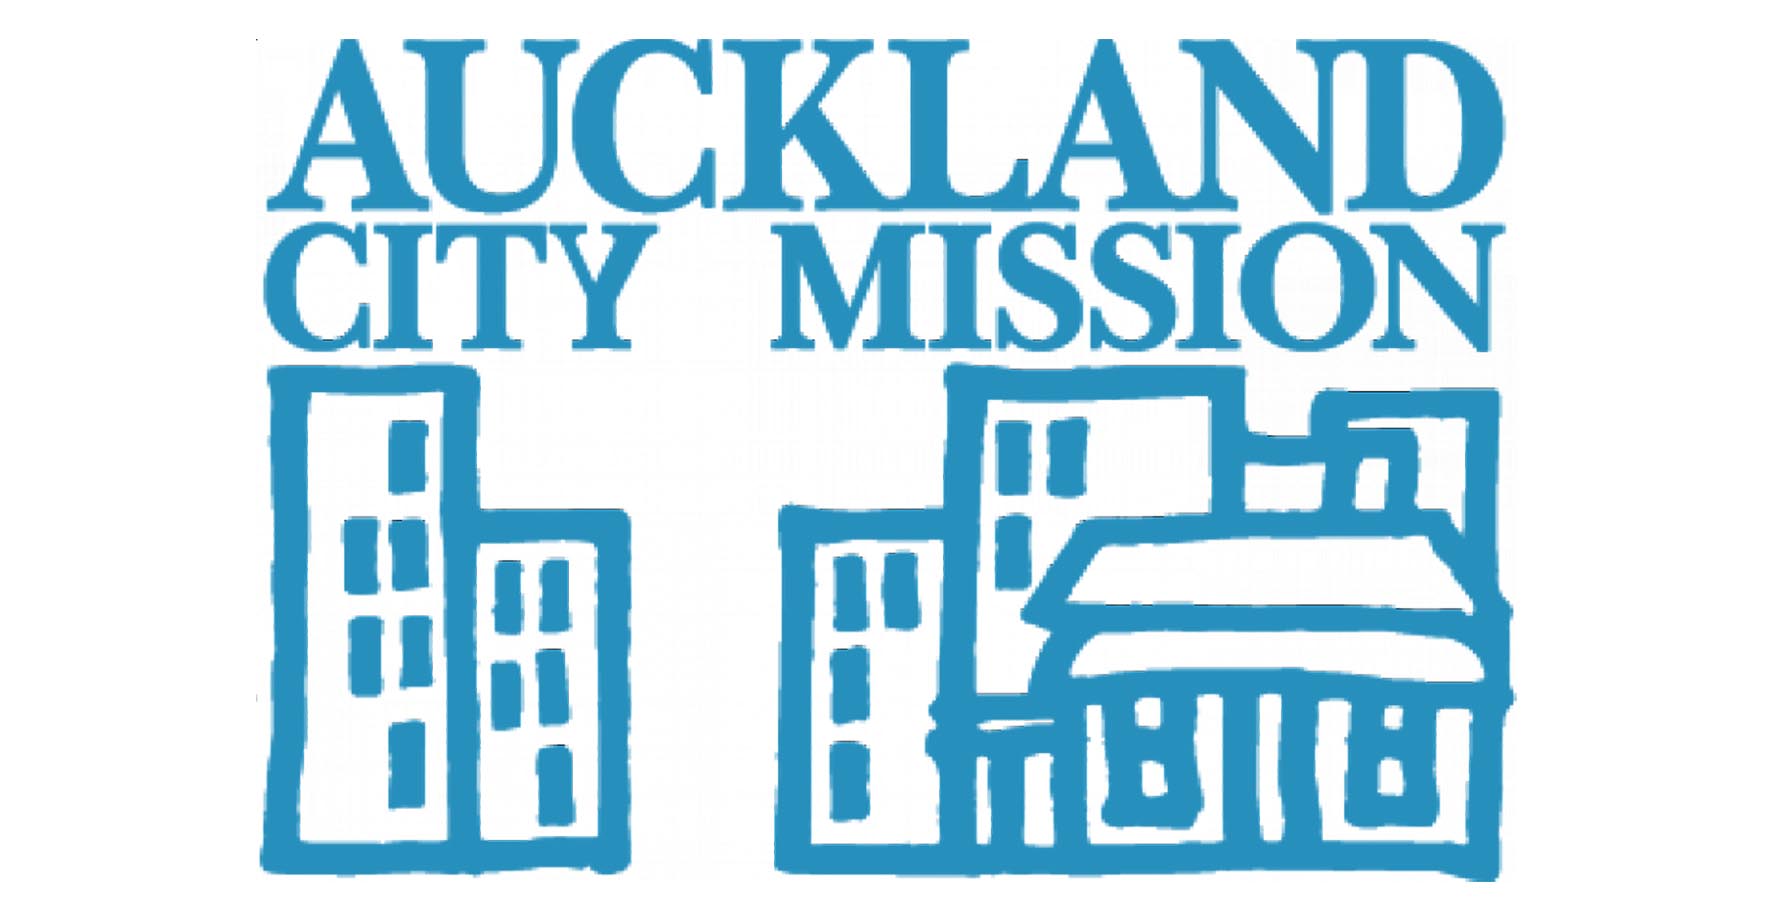 Forsyth Barr announces $452,000 donation to Auckland City Mission's HomeGround